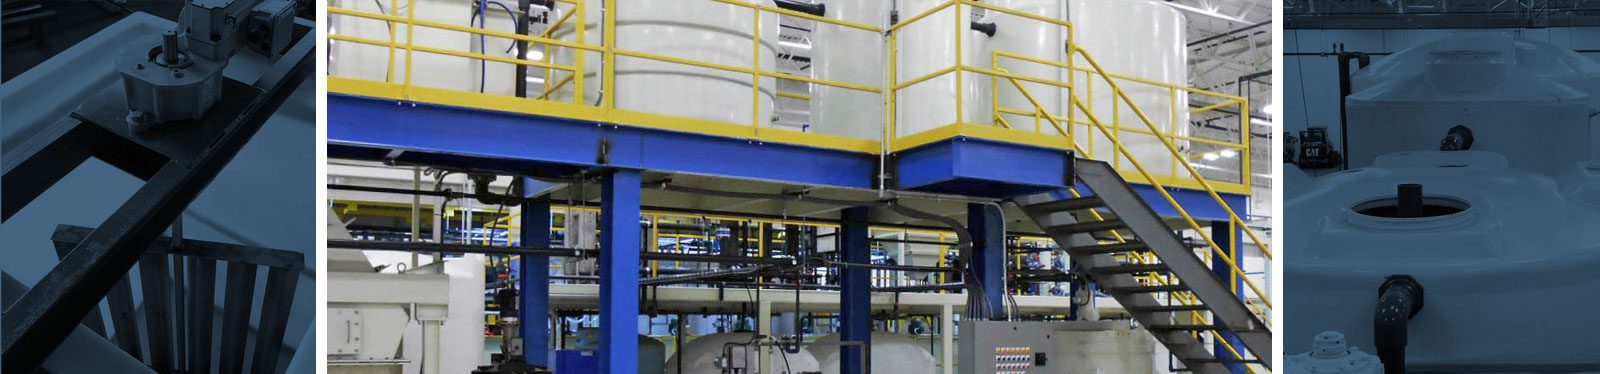 Waste treatment systems for electrocoating and powder coating